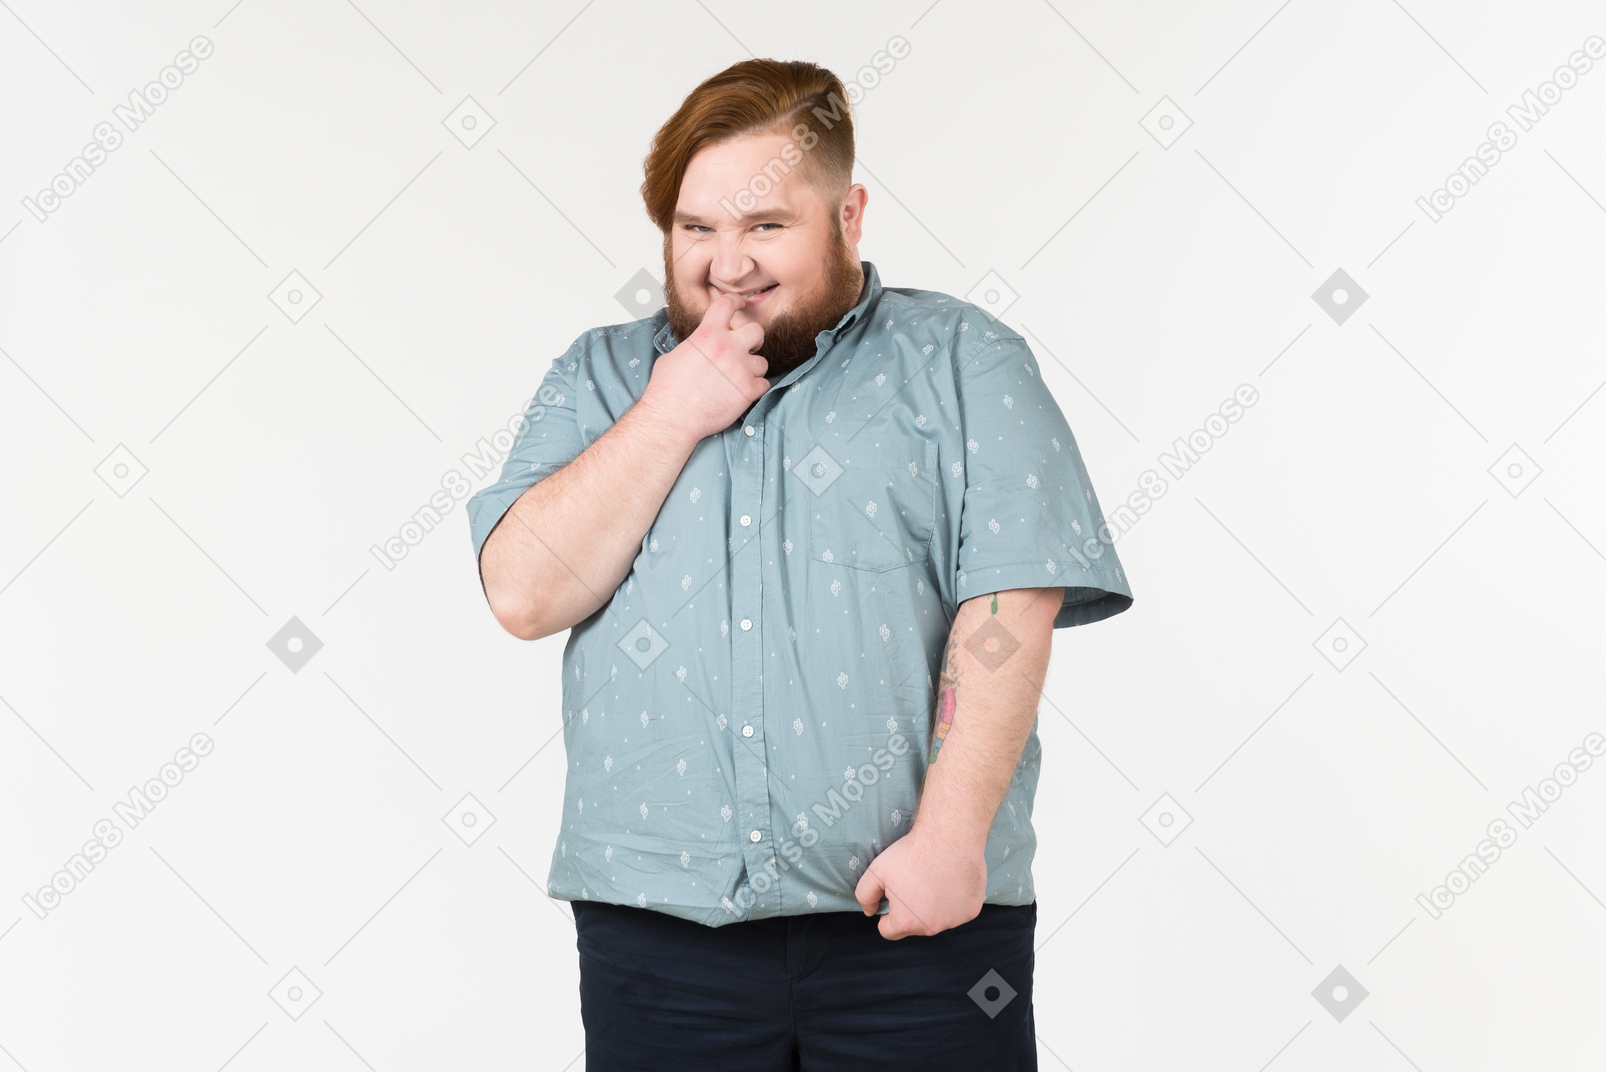 A fat man smiling shyly